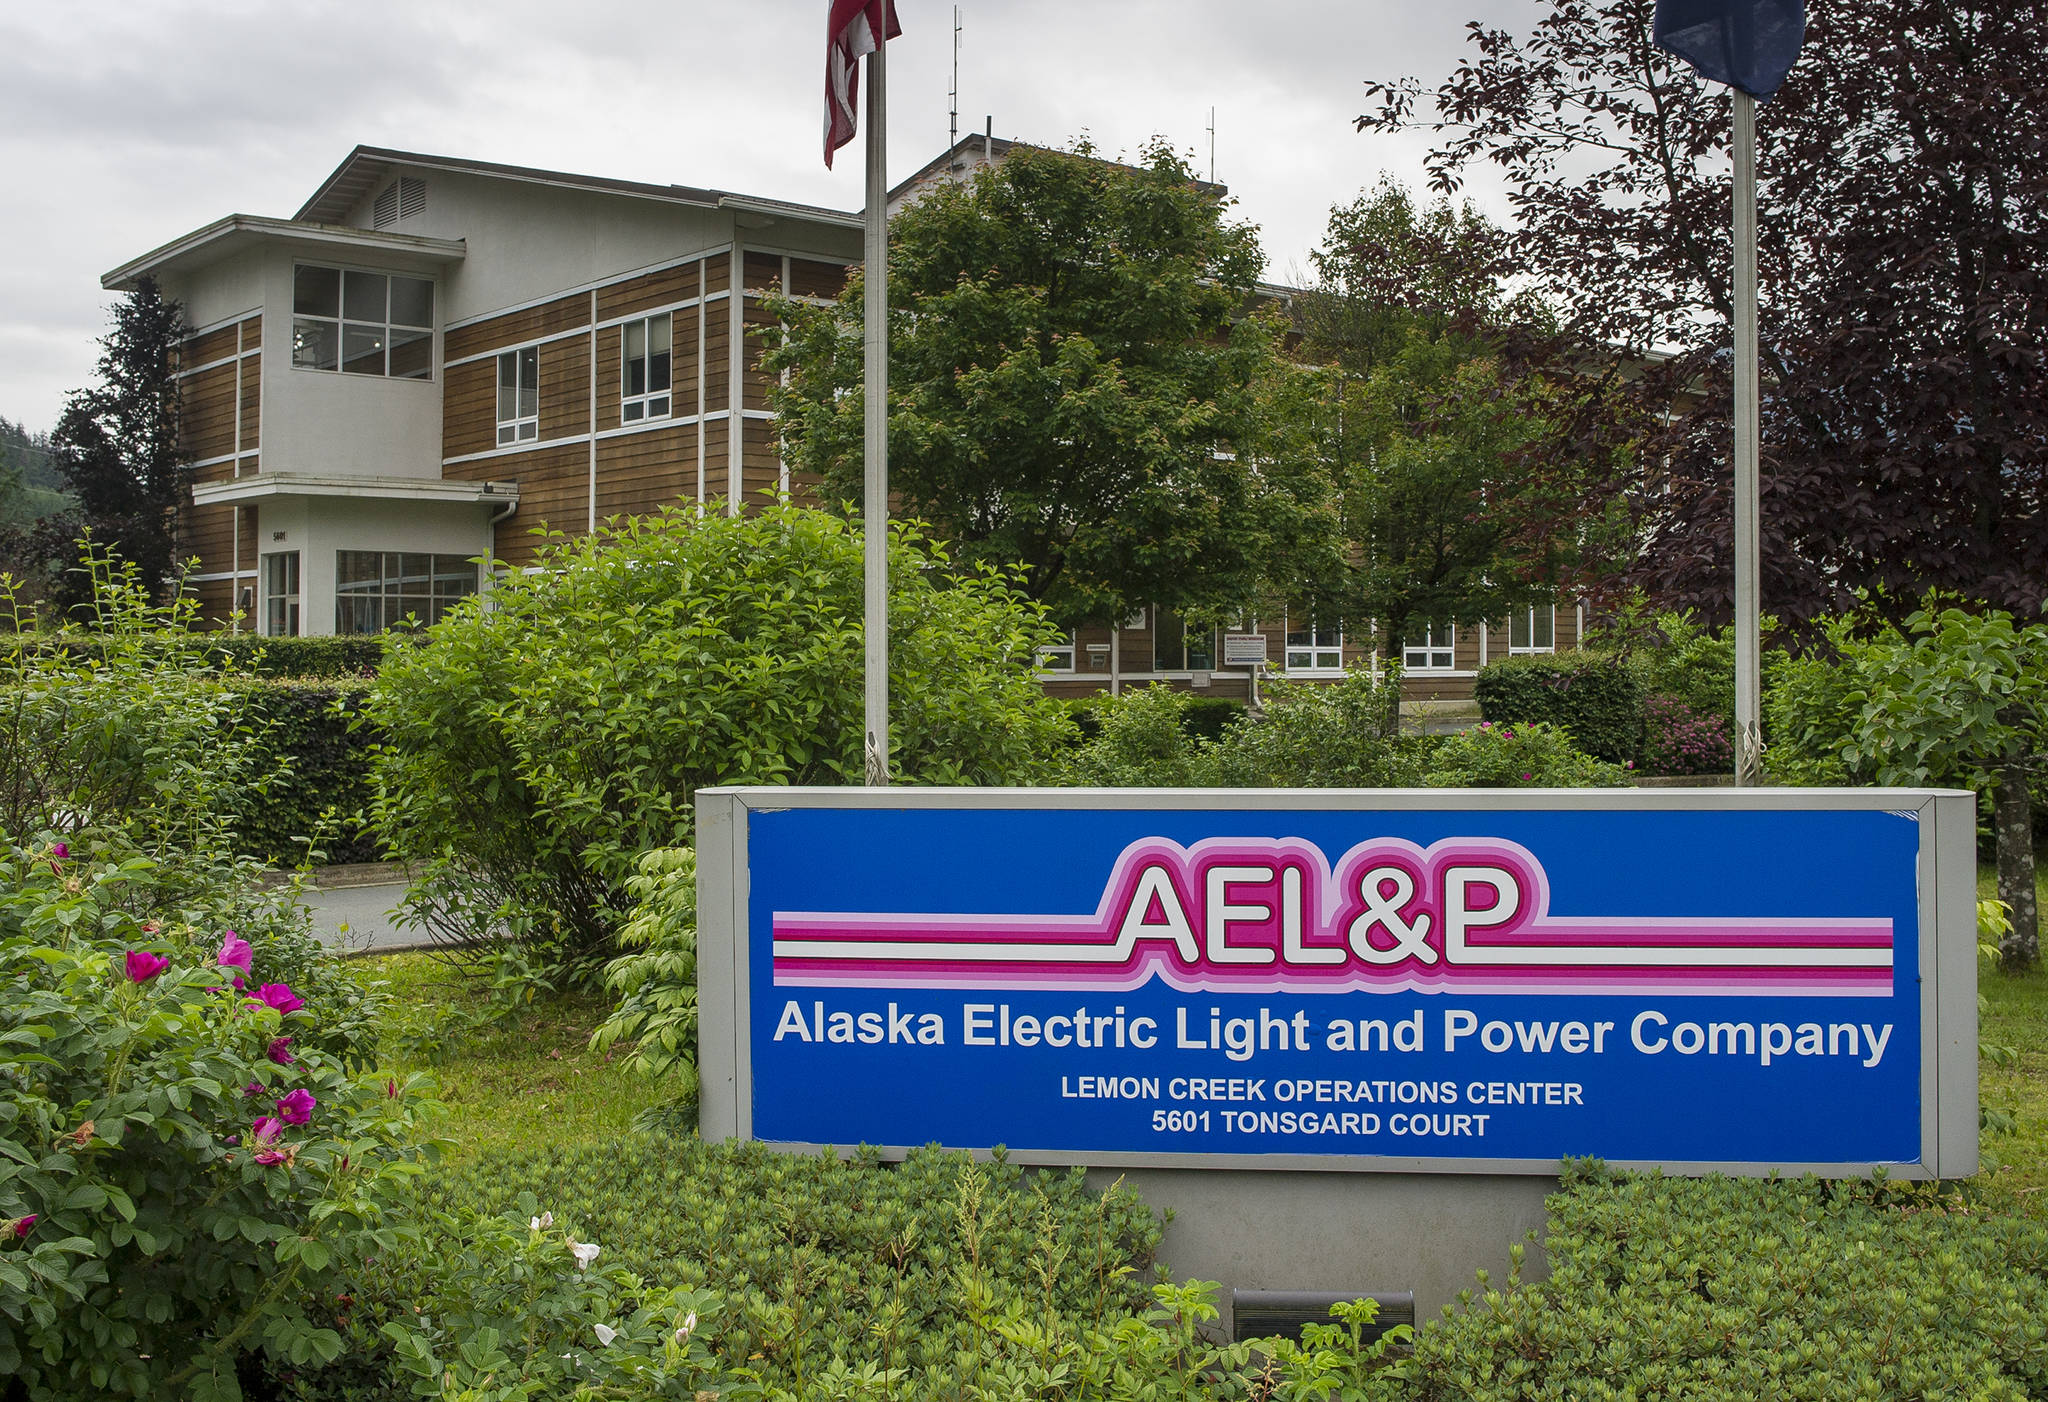 Opinion: AEL&P is short on power, but don’t tell anyone